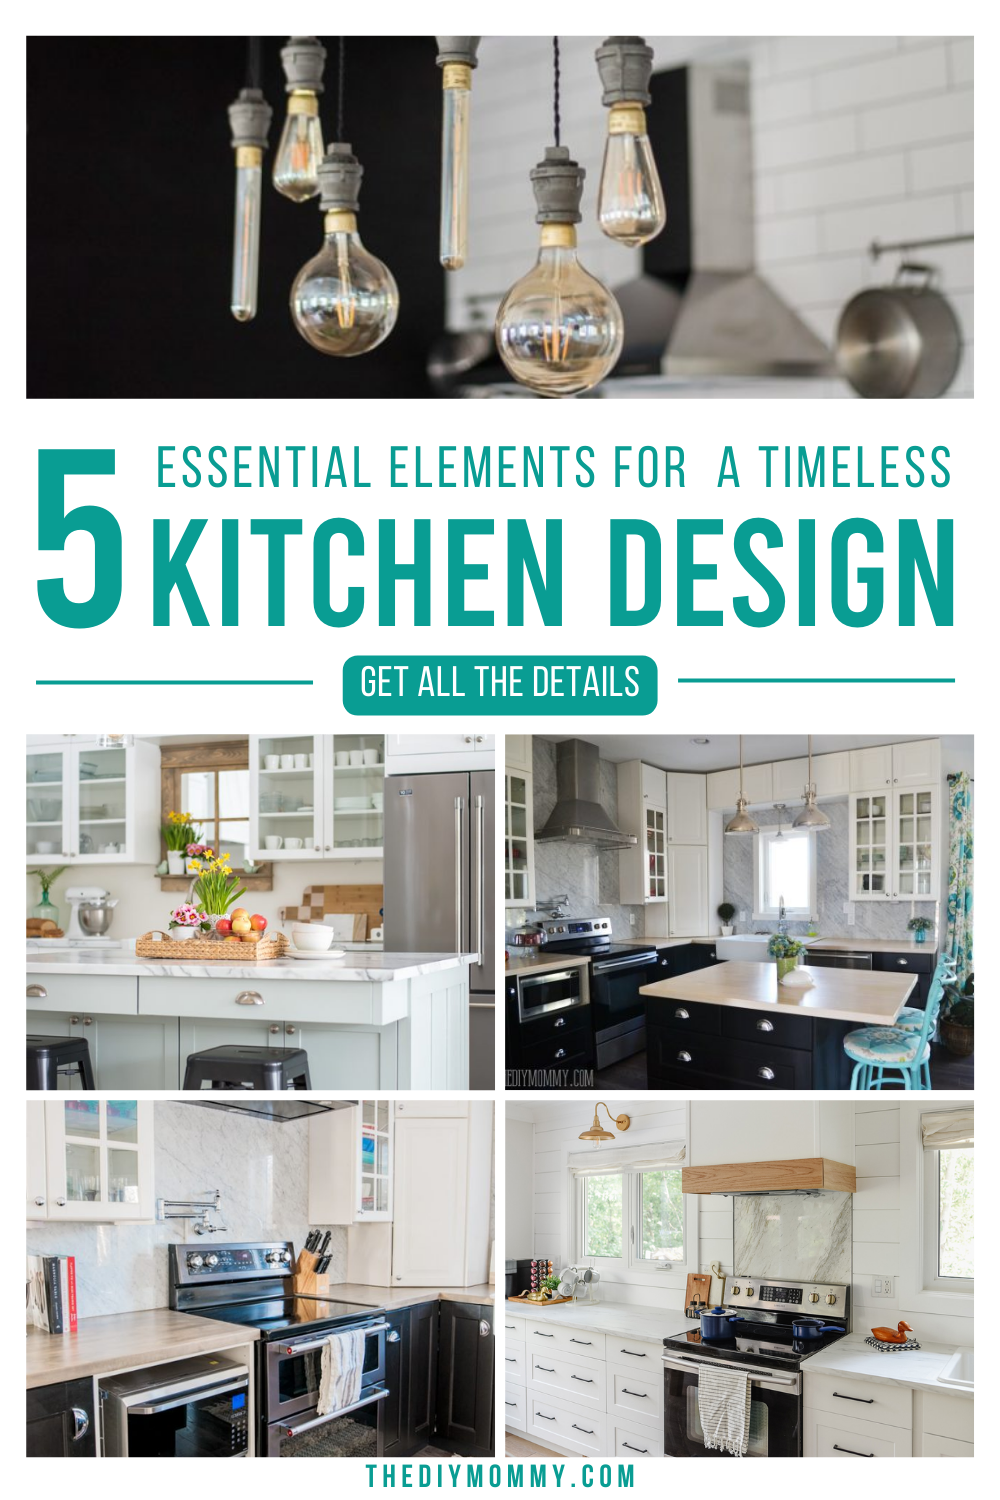 5 Essential Elements for a Timeless Kitchen Design